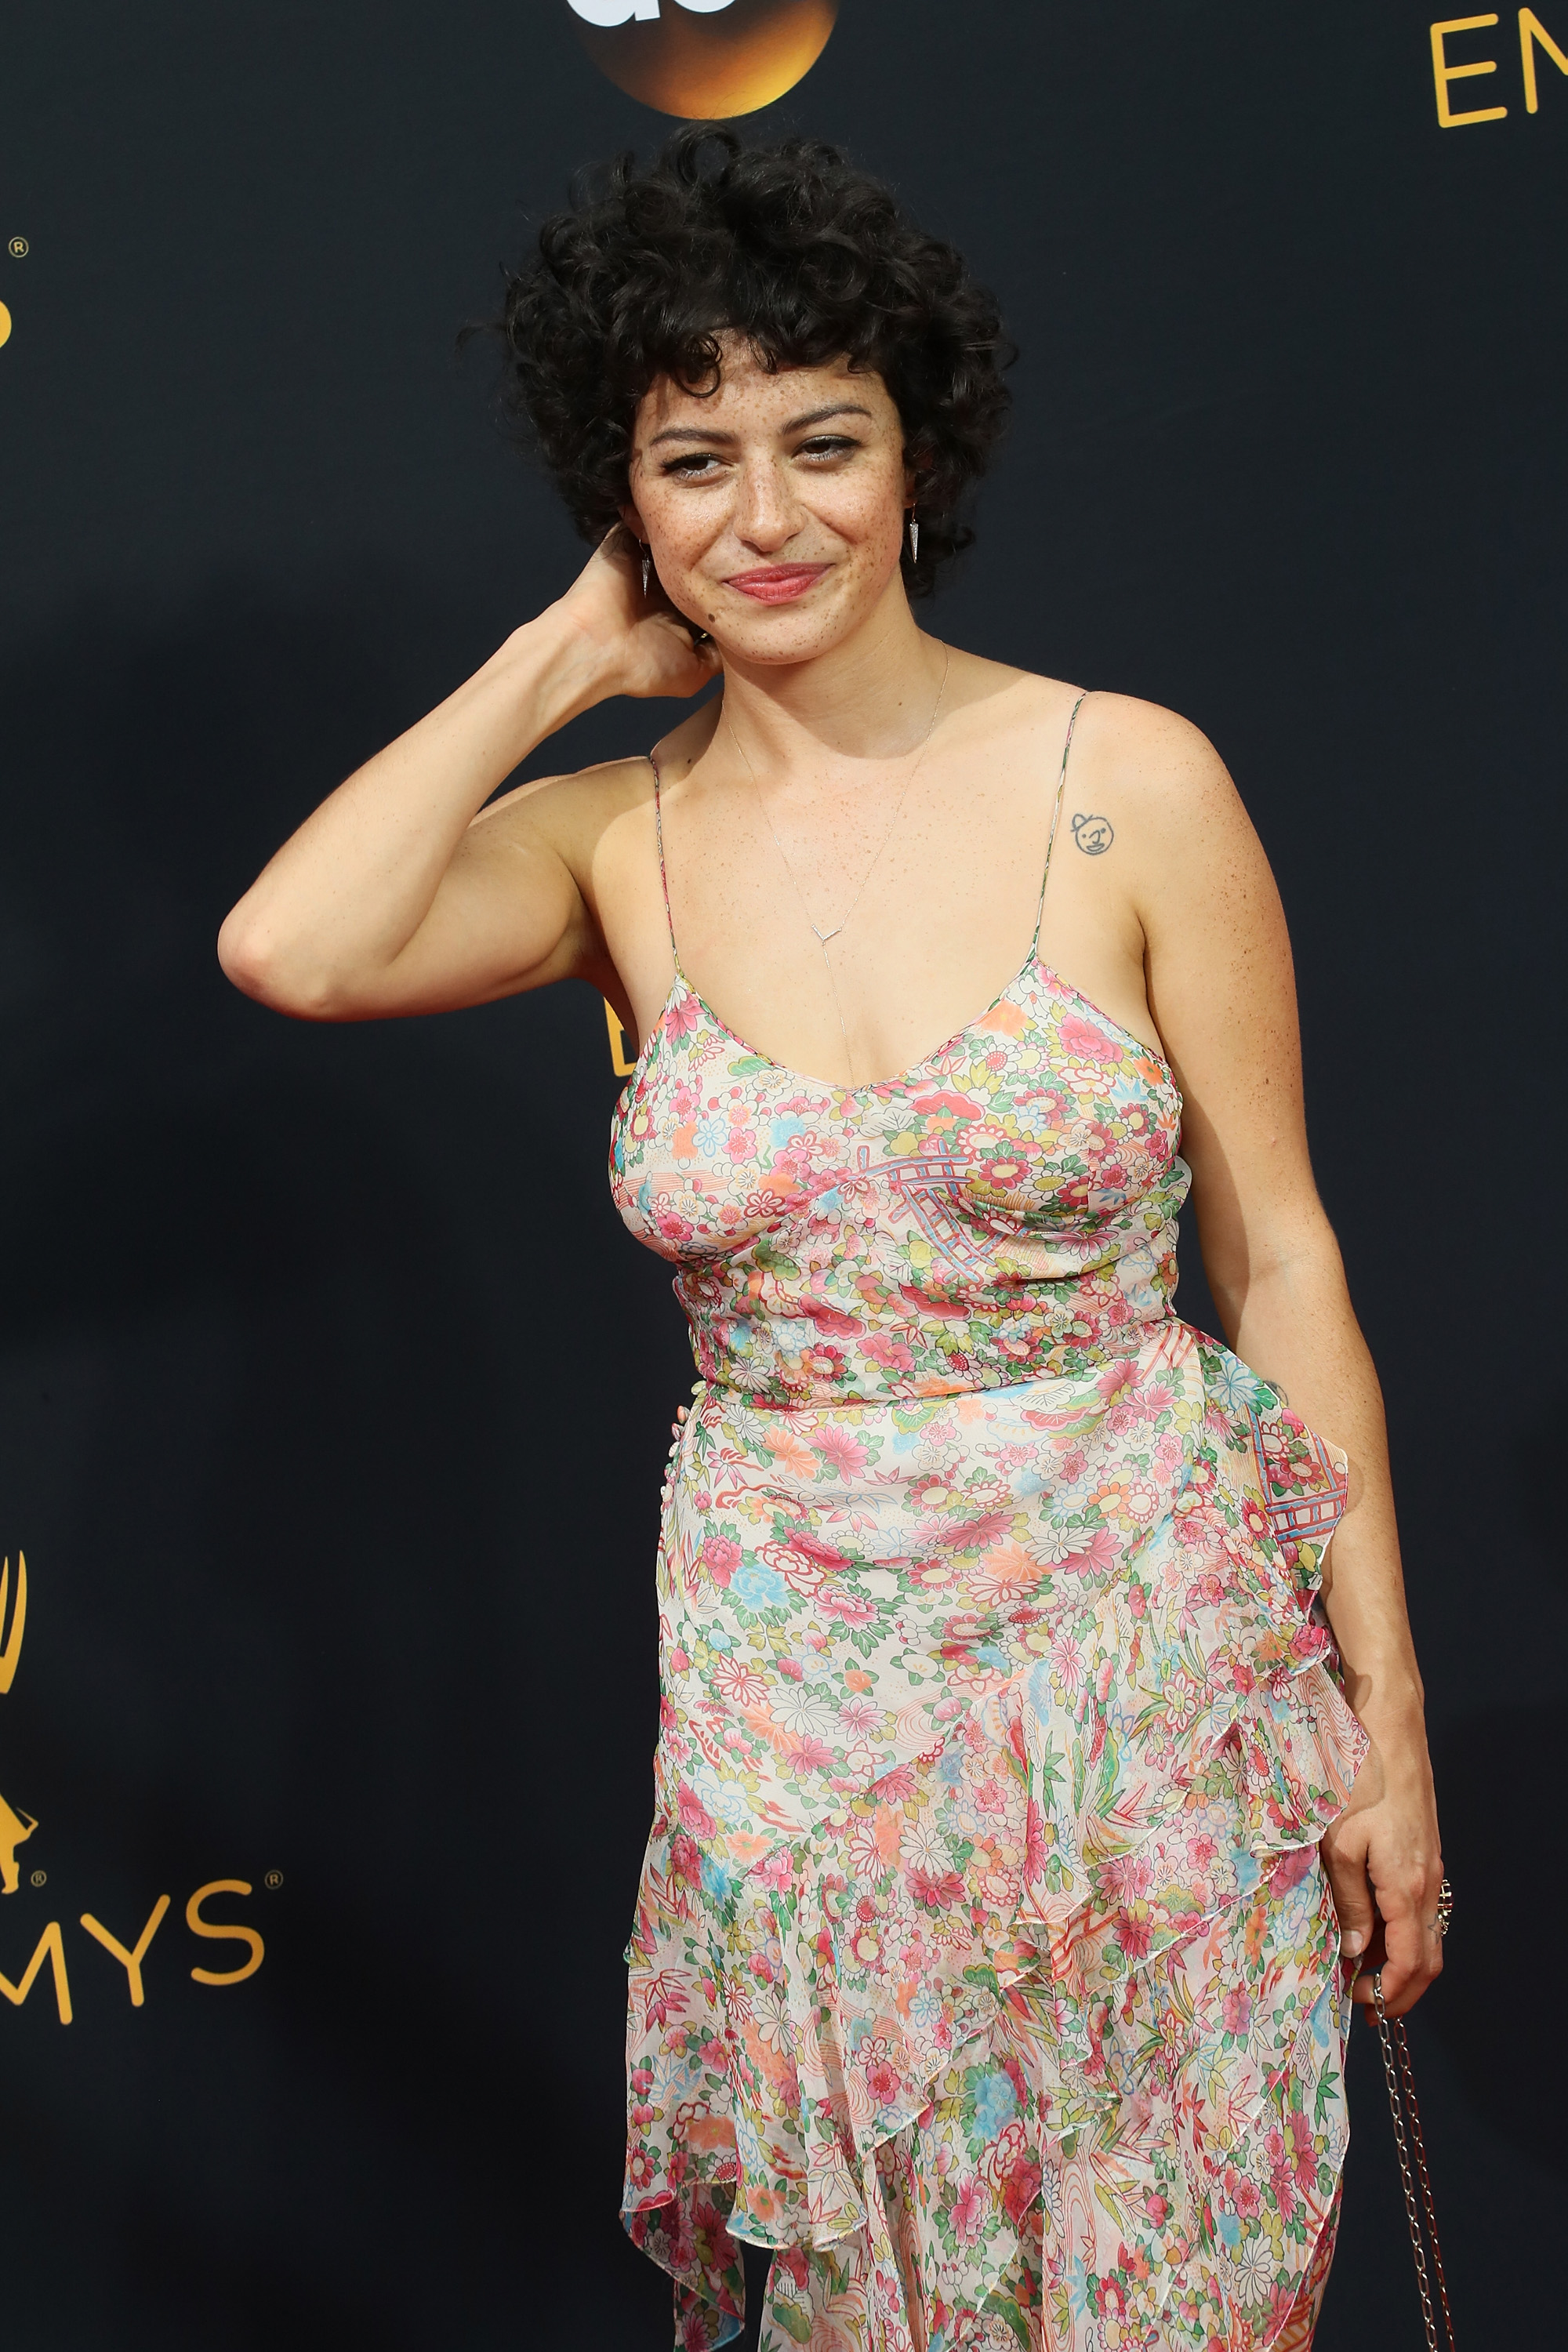 Actor Alia Shawkat arrives at the 68th Annual Primetime Emmy Awards on September 18, 2016 in Los Angeles, California. (Photo by David Livingston/Getty Images) (David Livingston;Getty Images)